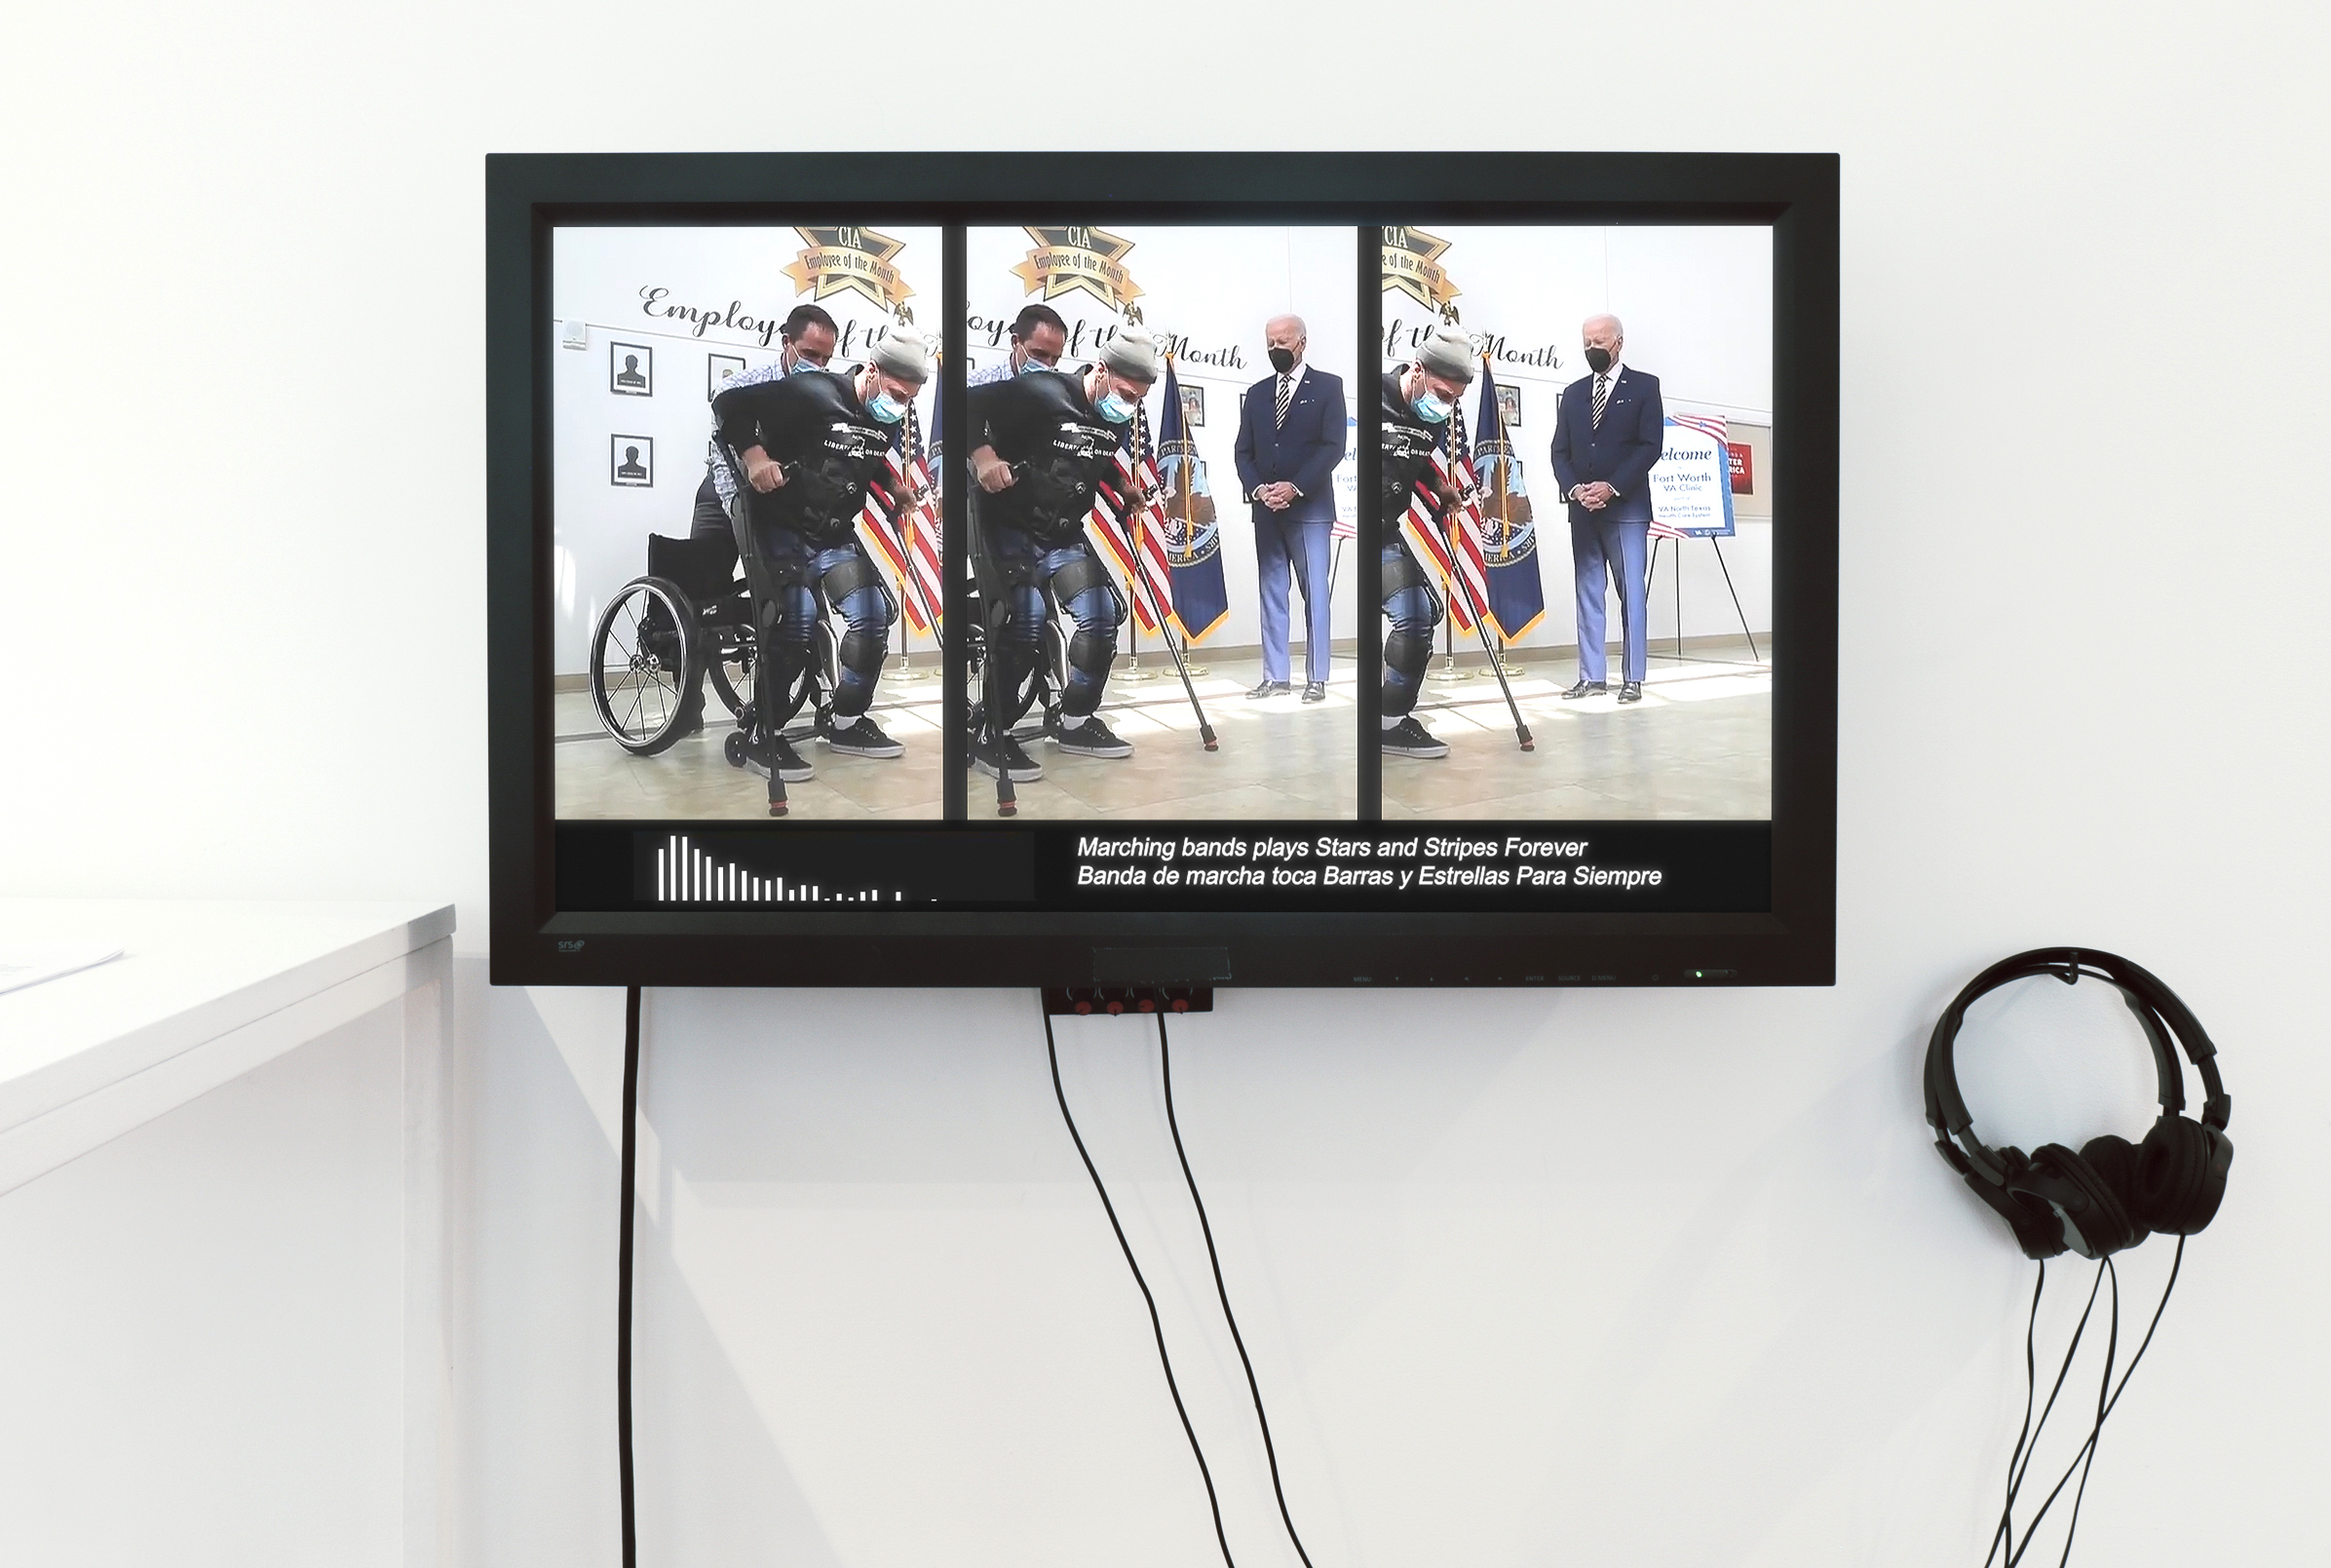 Flatscreen tv with two pairs of headphones hanging on a wall. Video still
            shows person using medical exoskeleton and arm crutches standing
             up from their wheelchair
           while President Biden looks on.